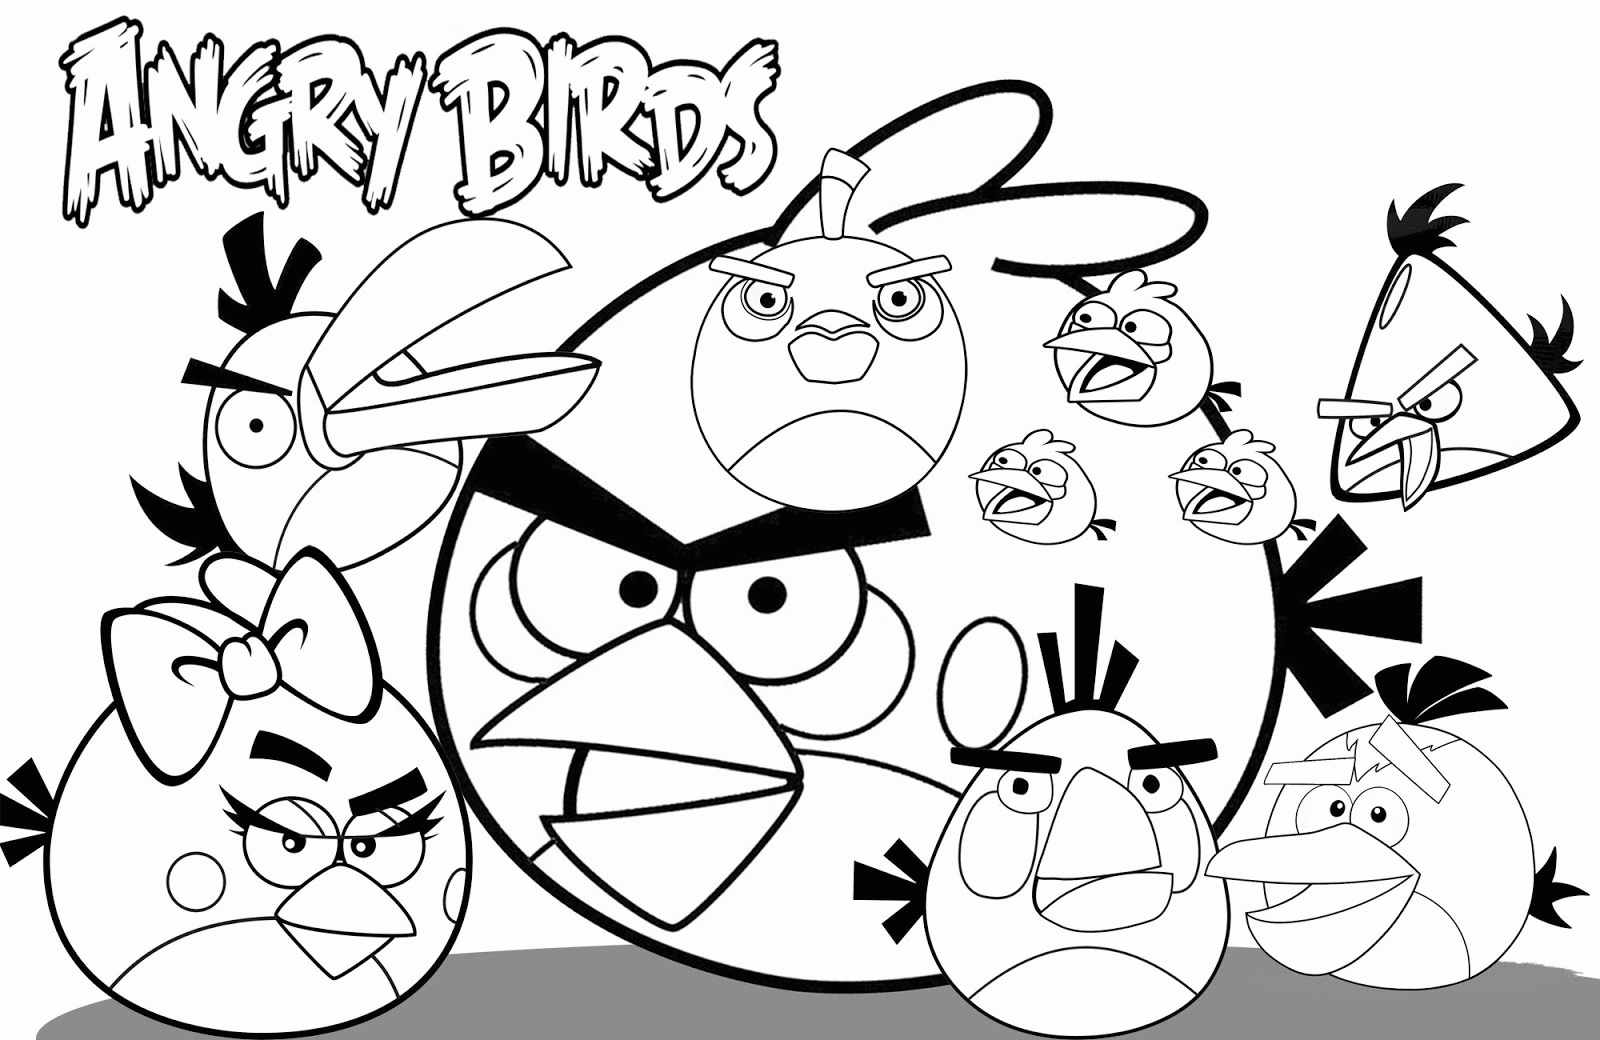 Free Printable Angry Birds Coloring Pages 20 Pictures   Colorine ...